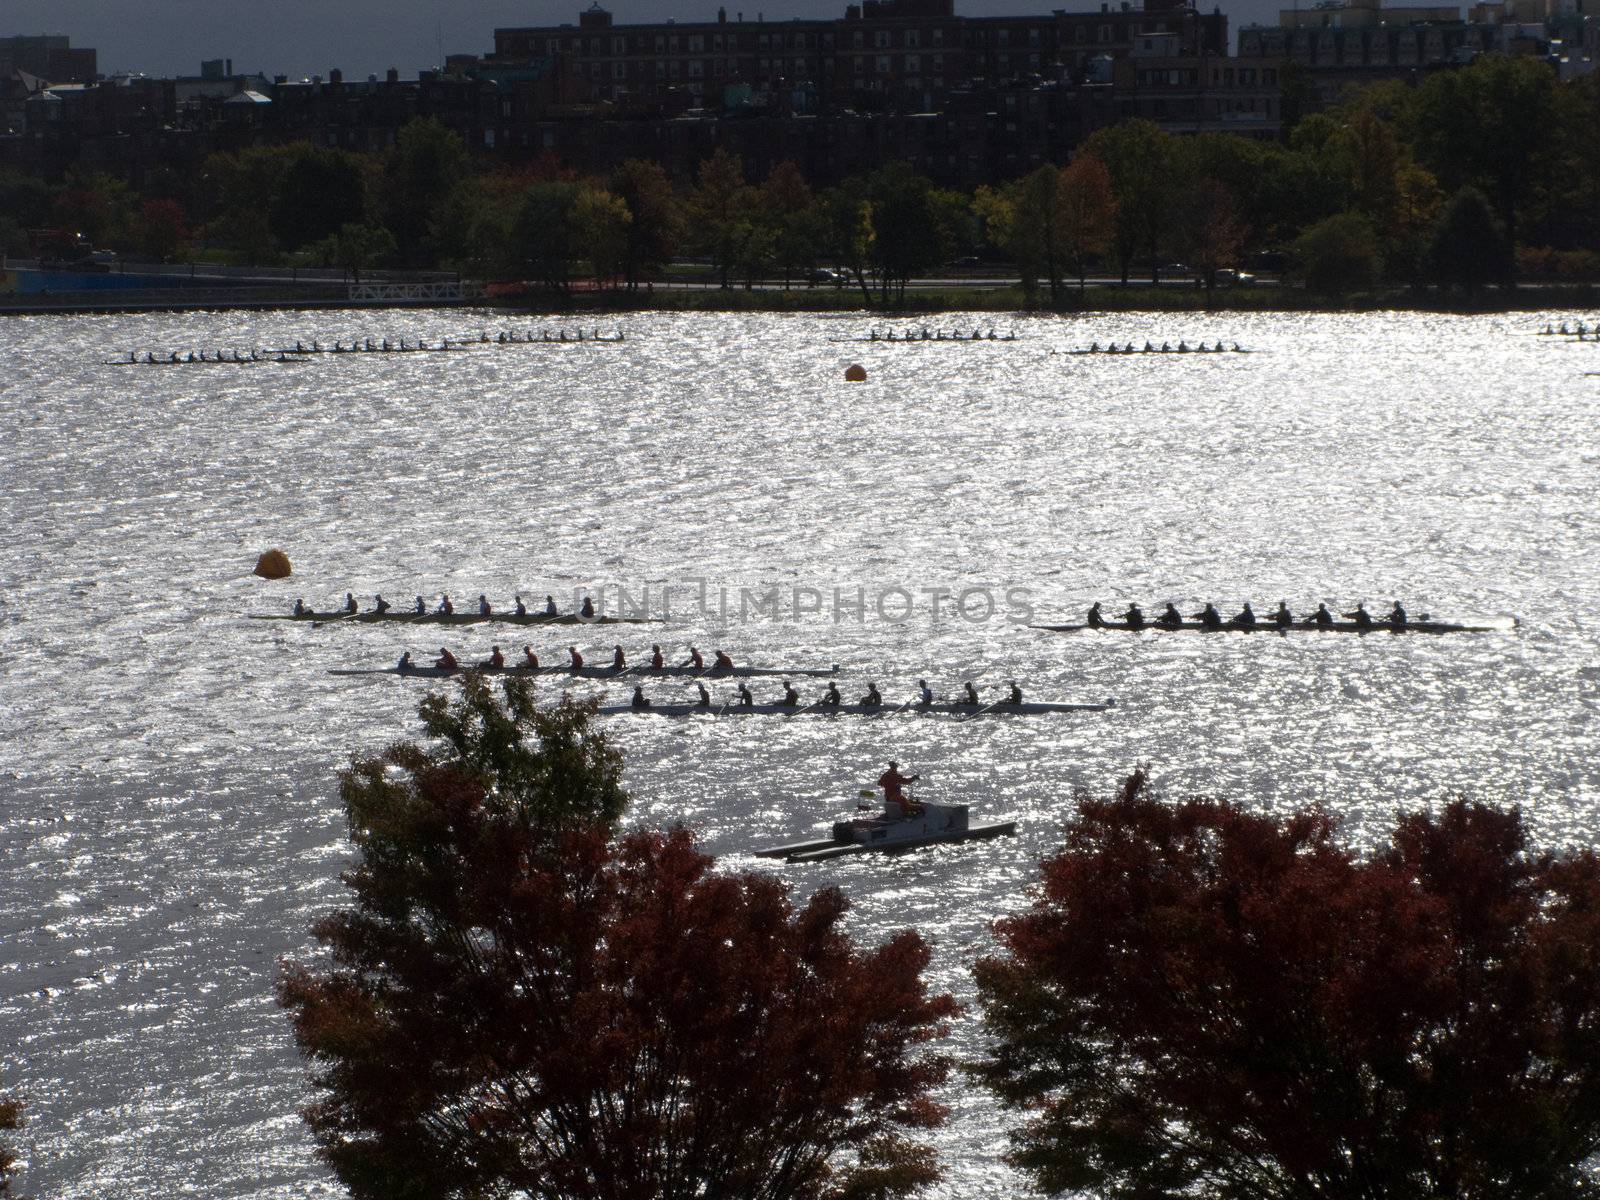 Charles River Rowers by edan